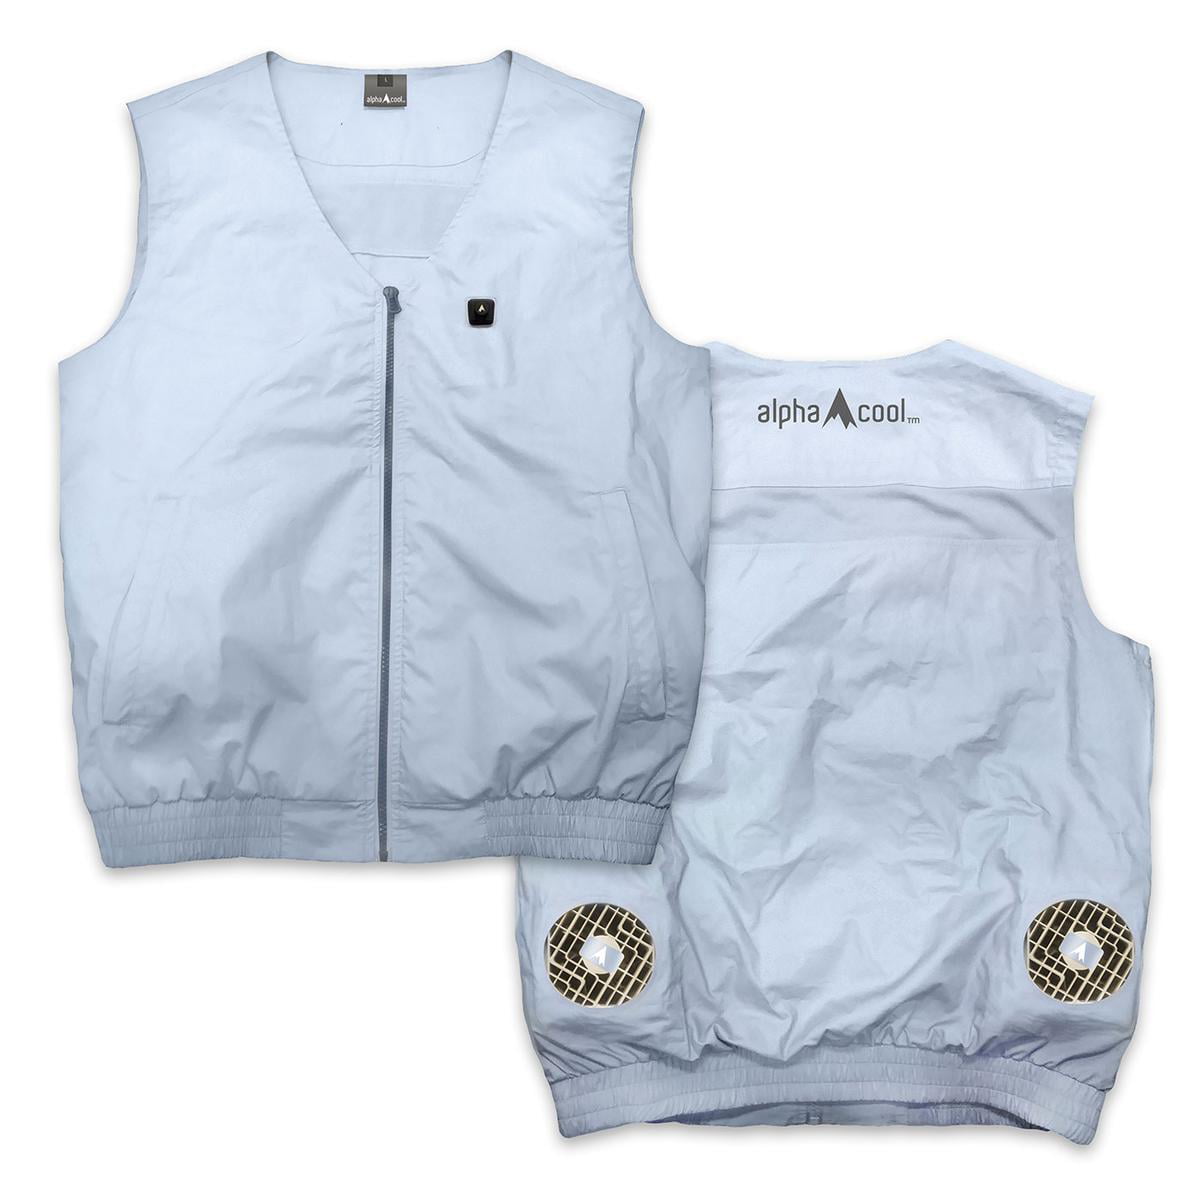 Coolspring by Venture Heat Battery Powered Fan Cooling Vests - WindTech  Series